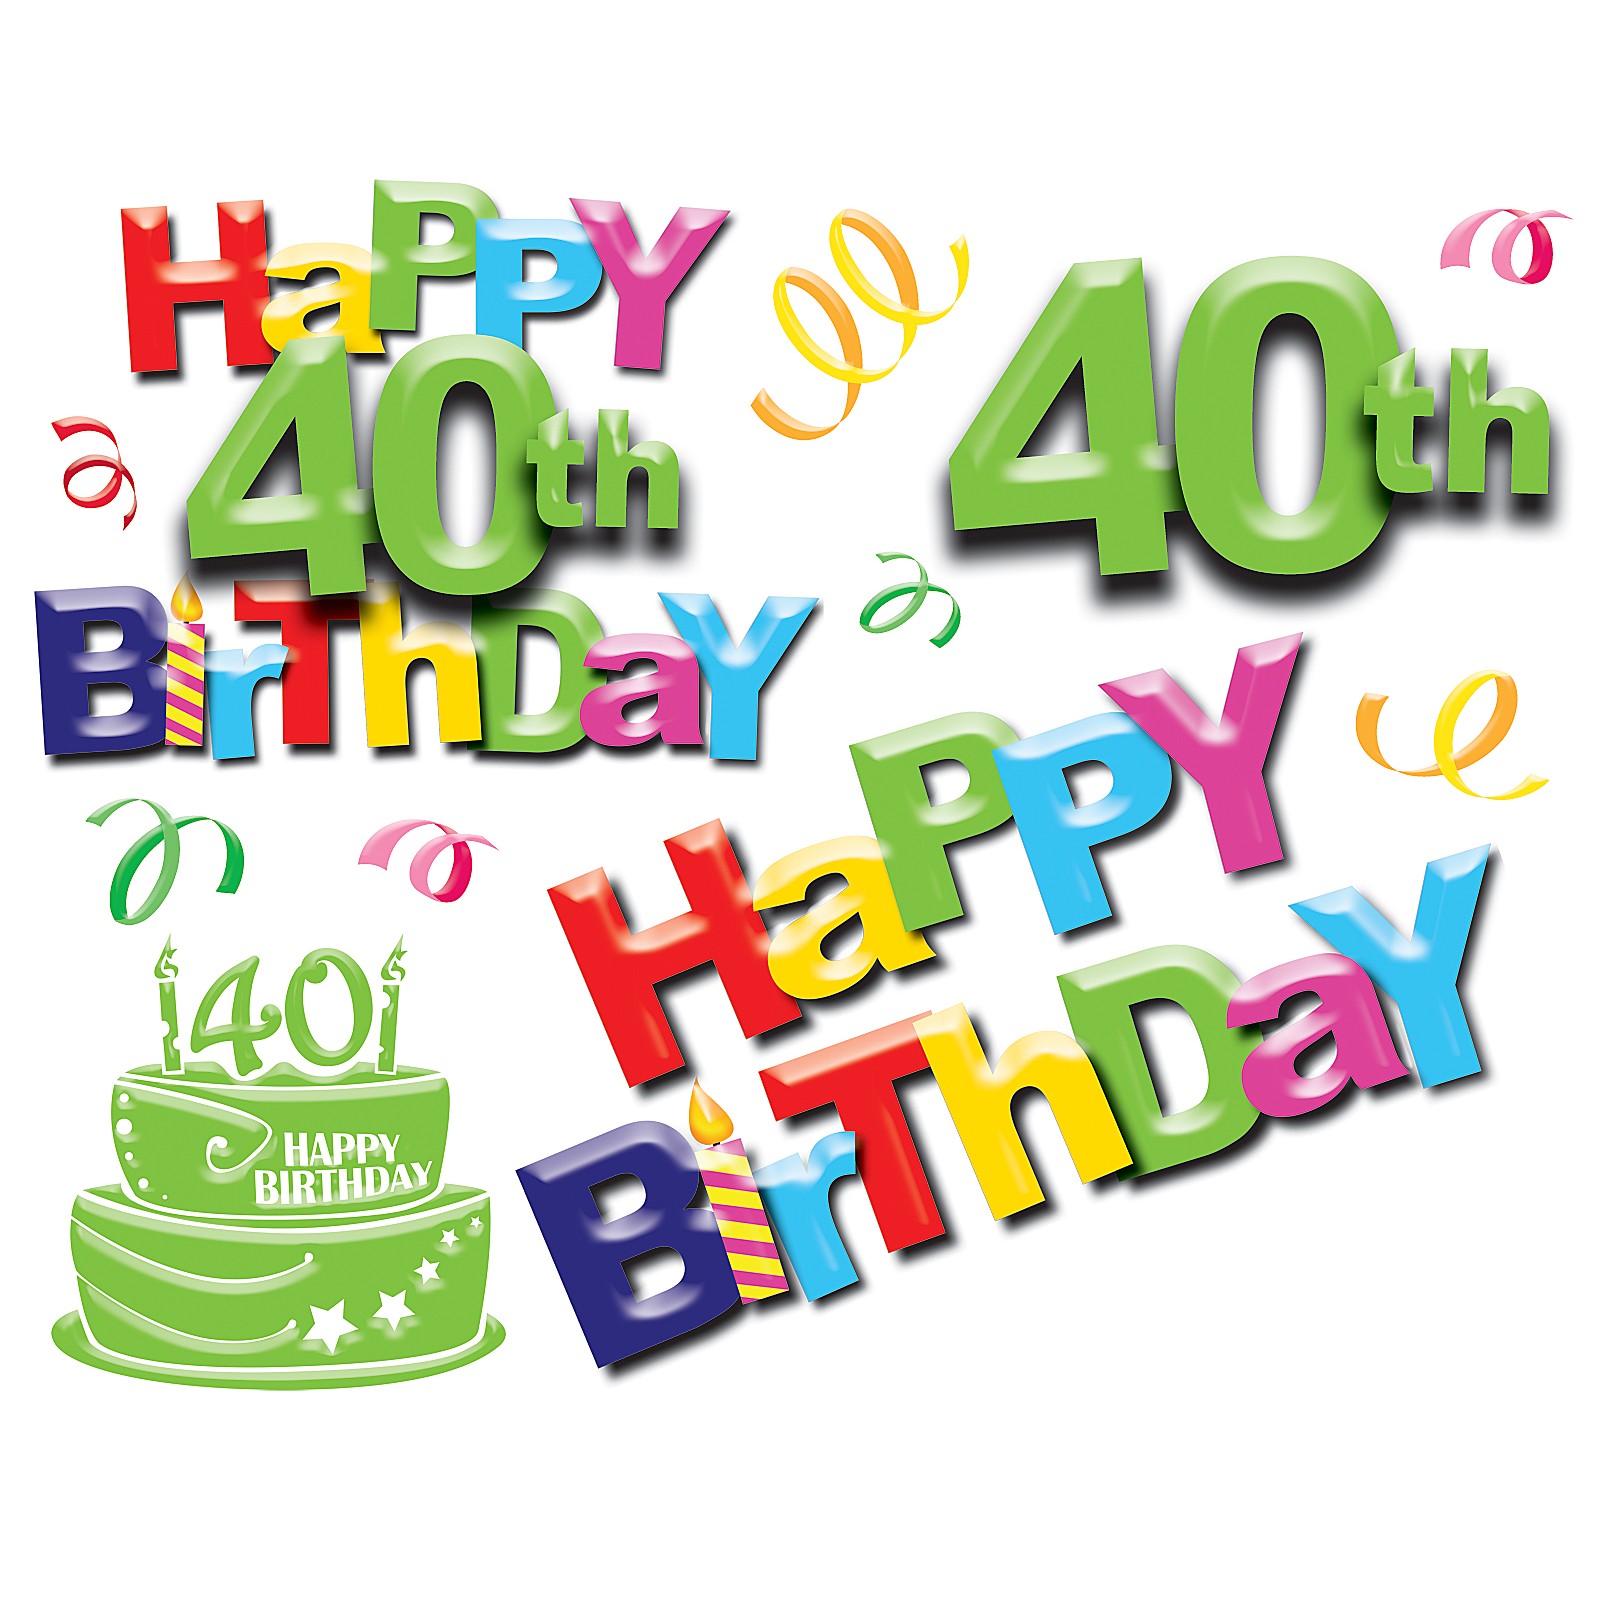 40th-birthday-pictures-clip-art-cliparts-co